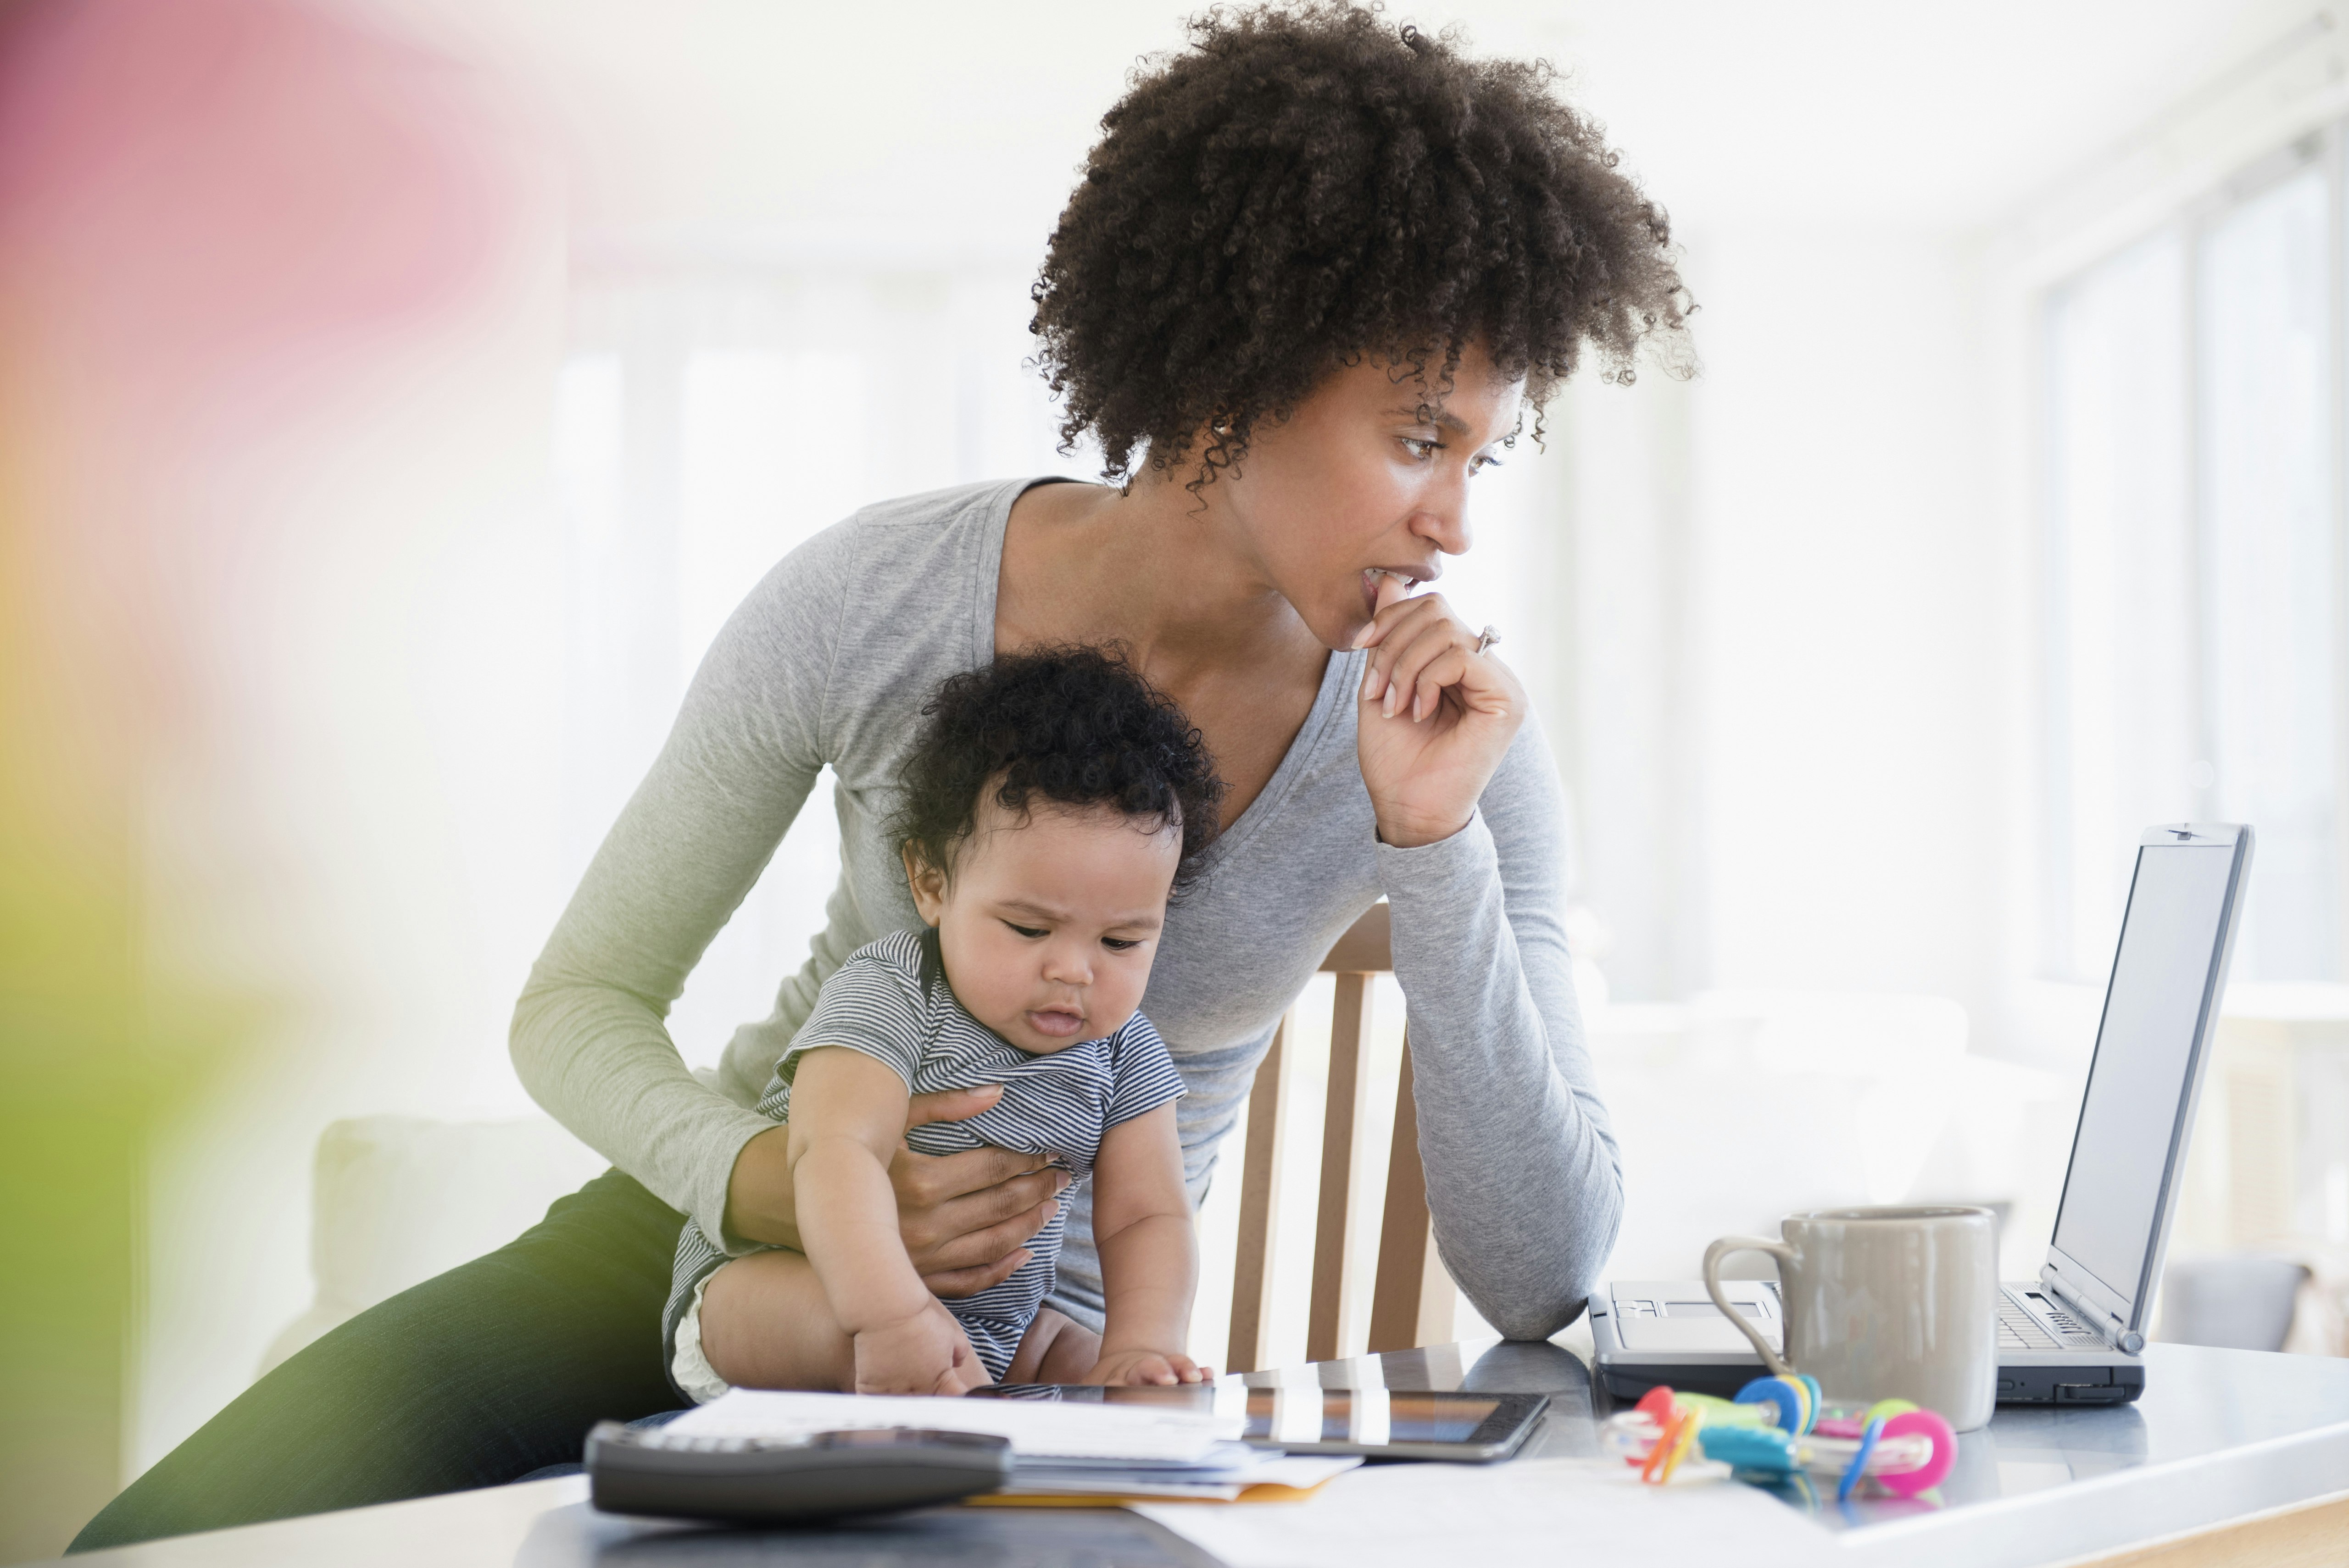 Why Becoming a Mom Calmed This Woman's Anxiety